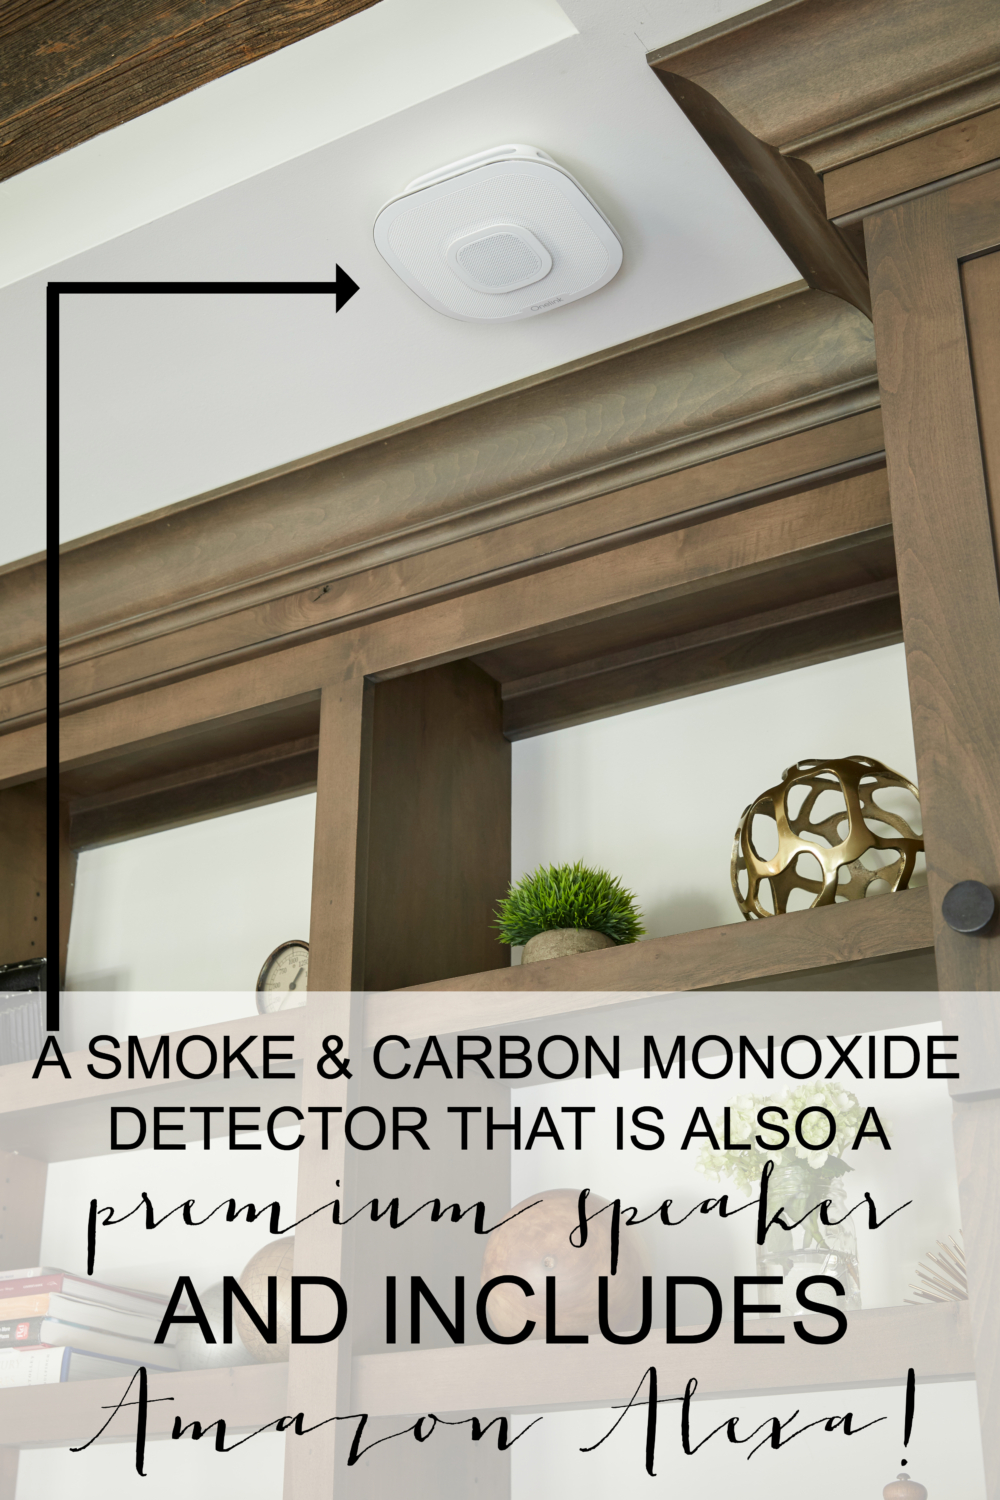 Onelink Safe & Sound is a smoke and carbon monoxide detector that is also a premium speaker for music and loaded with Amazon Alexa!